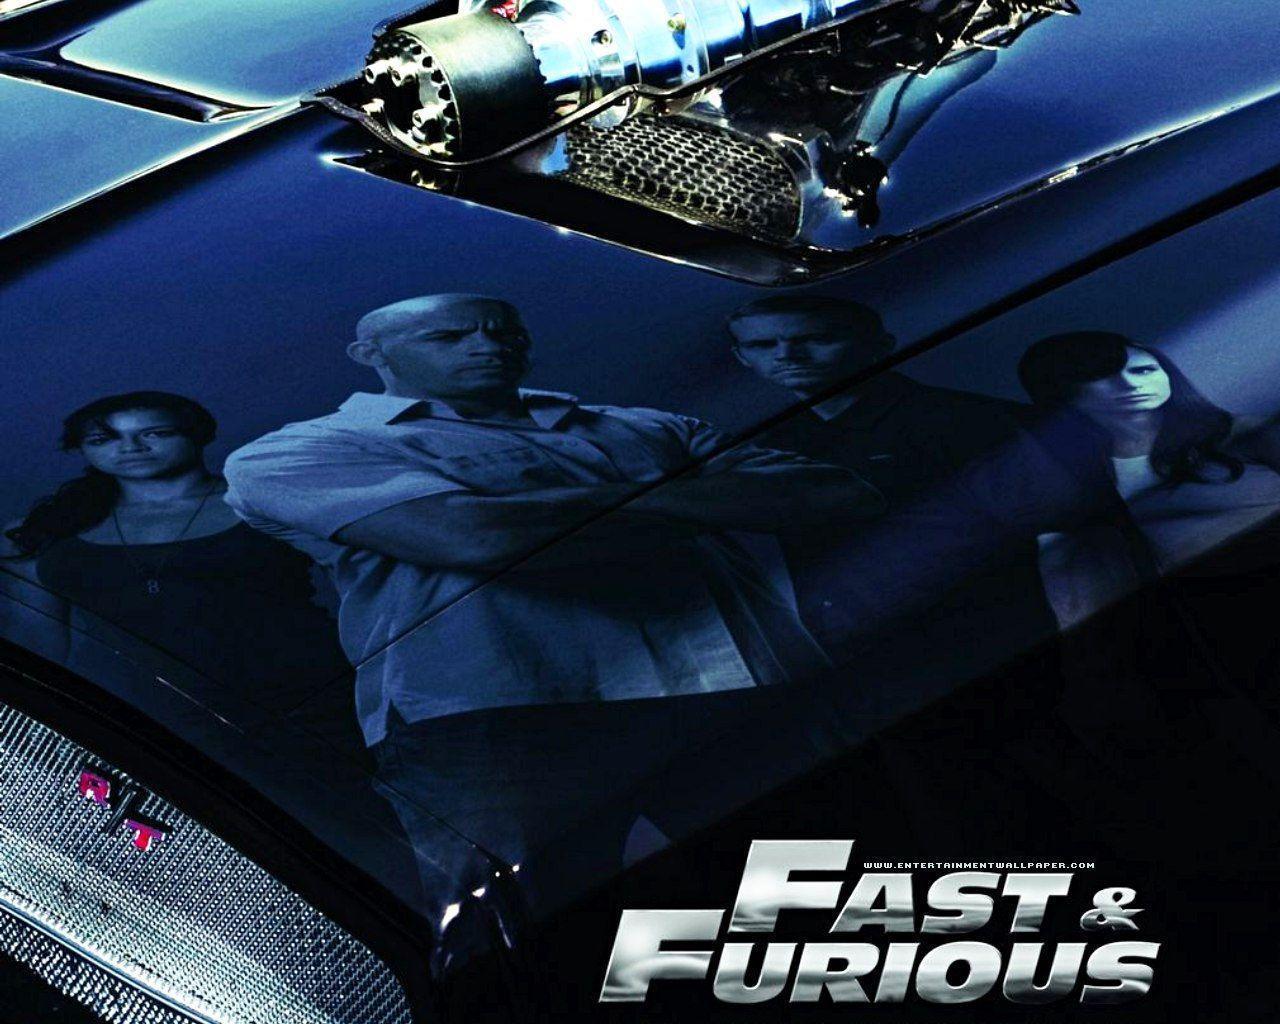 Furious Wallpaper. Furious 7 Wallpaper, Furious Wallpaper and Furious 7 Desktop Background